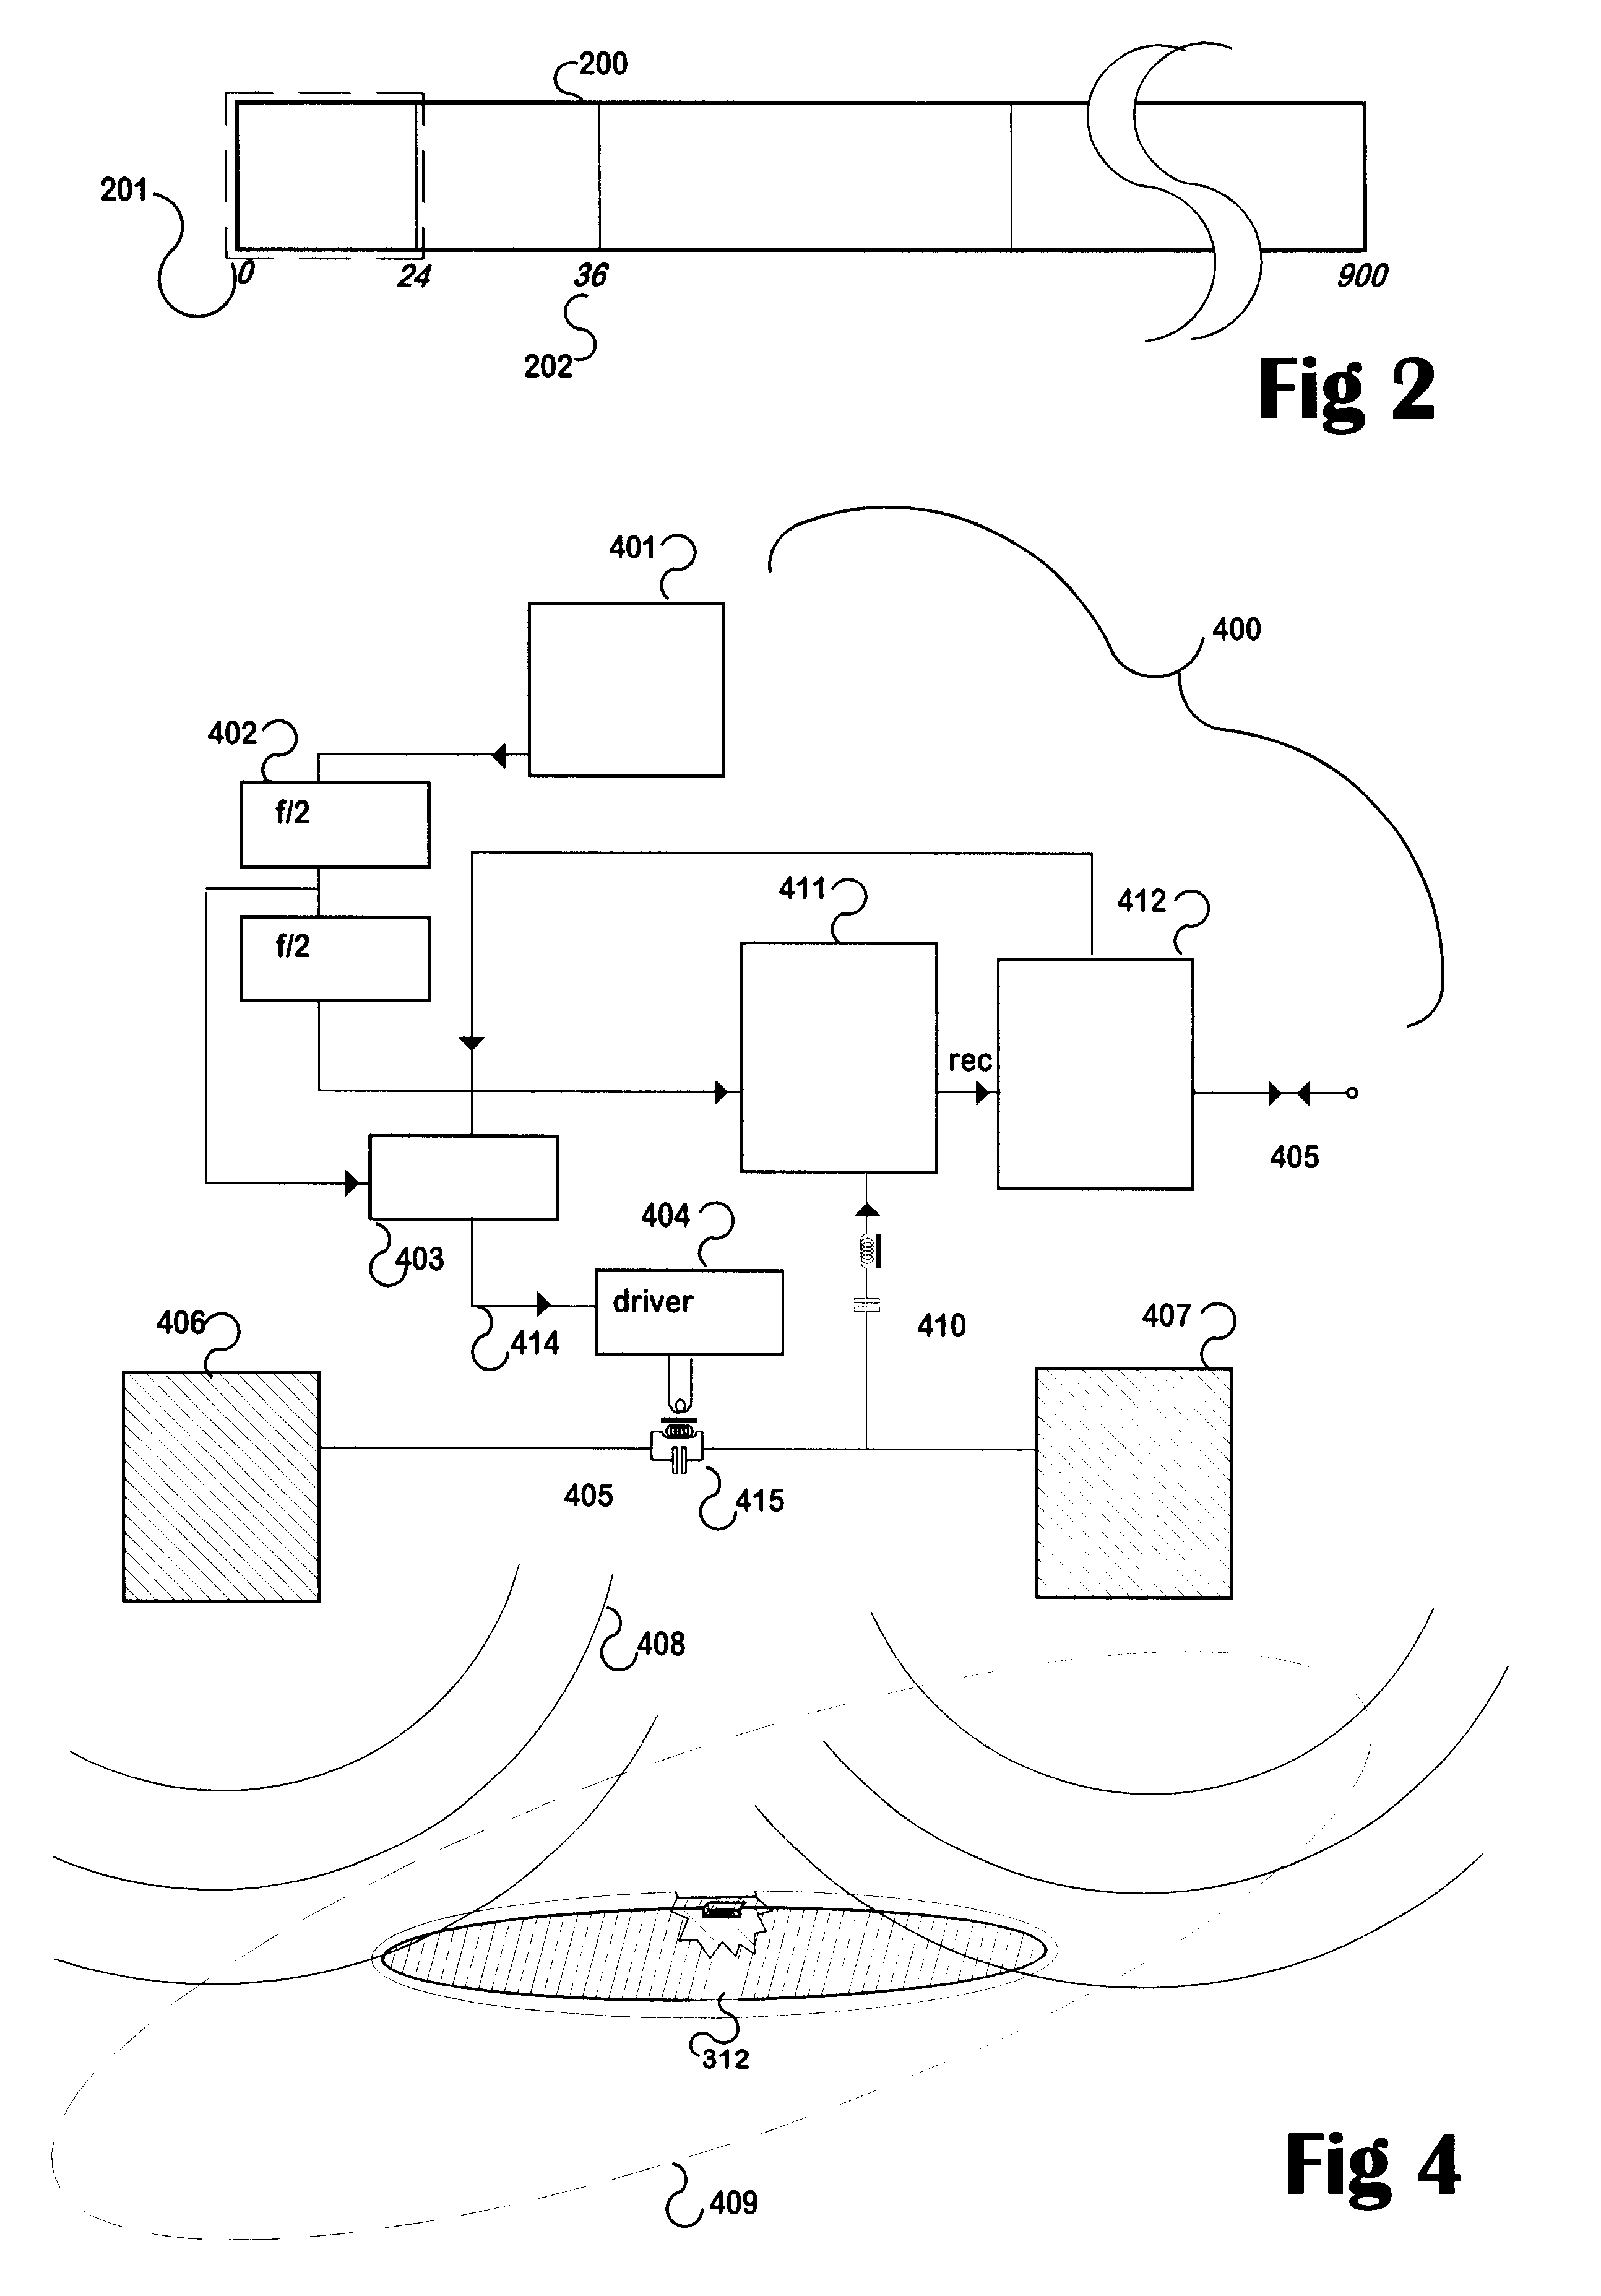 Terminal for an active labelling system